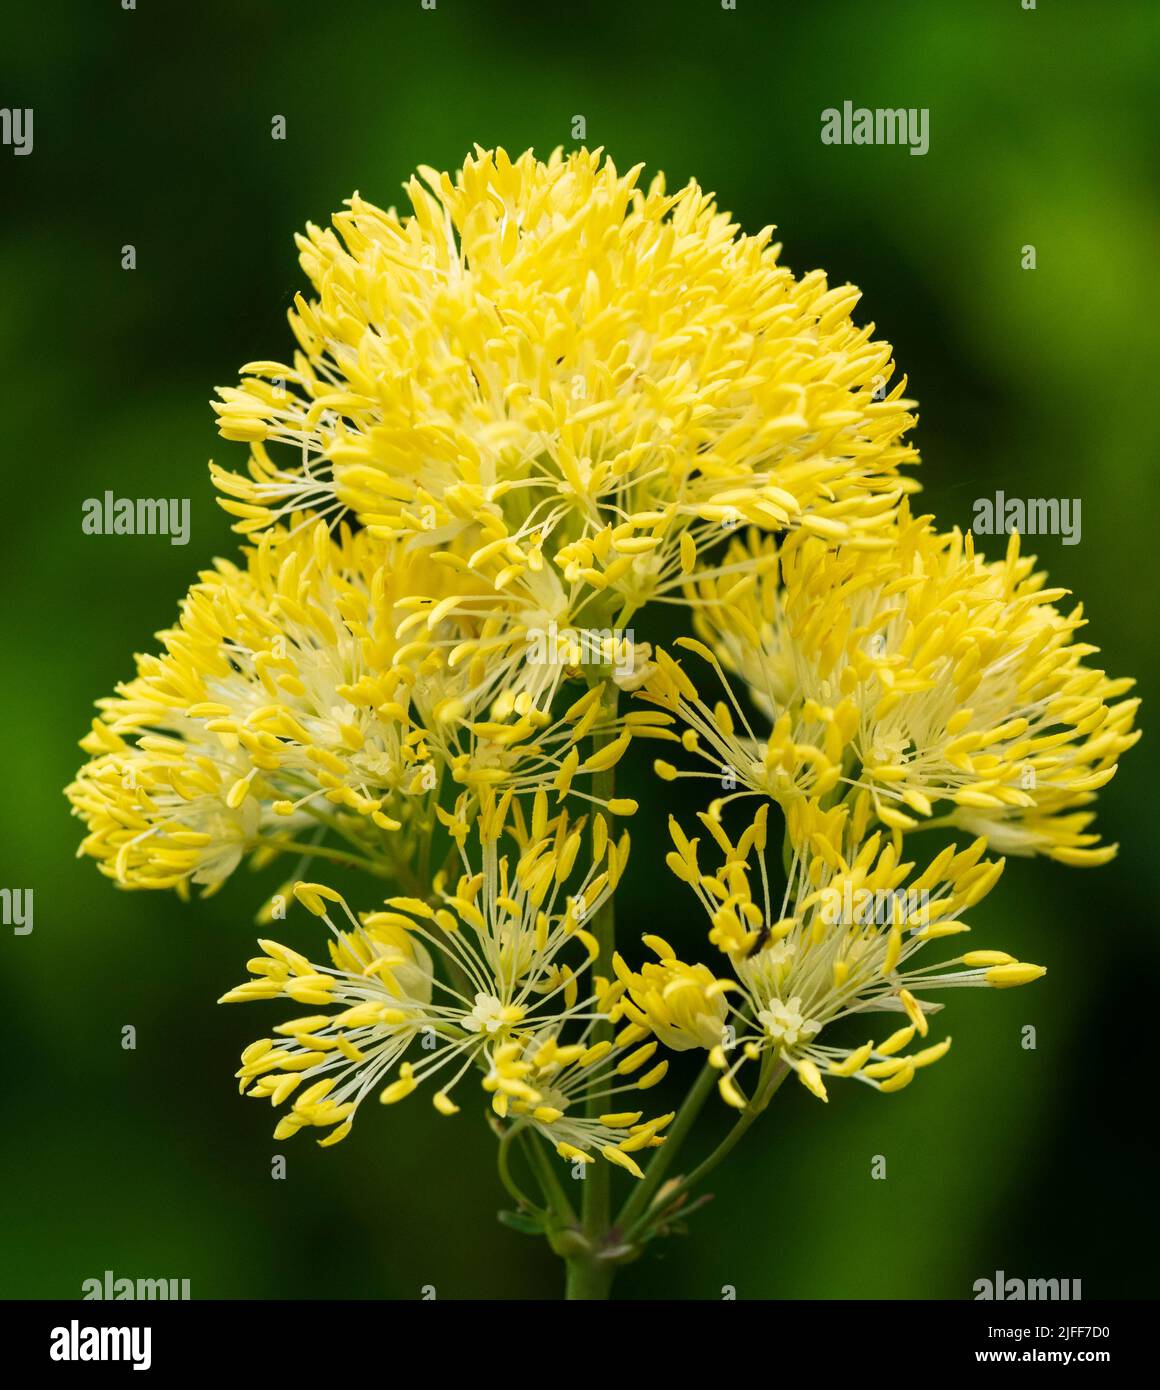 Powderpuff blooms in the flower head of the hardy perennial yellow meadowrue, Thalictrum flavum ssp. glaucum Stock Photo